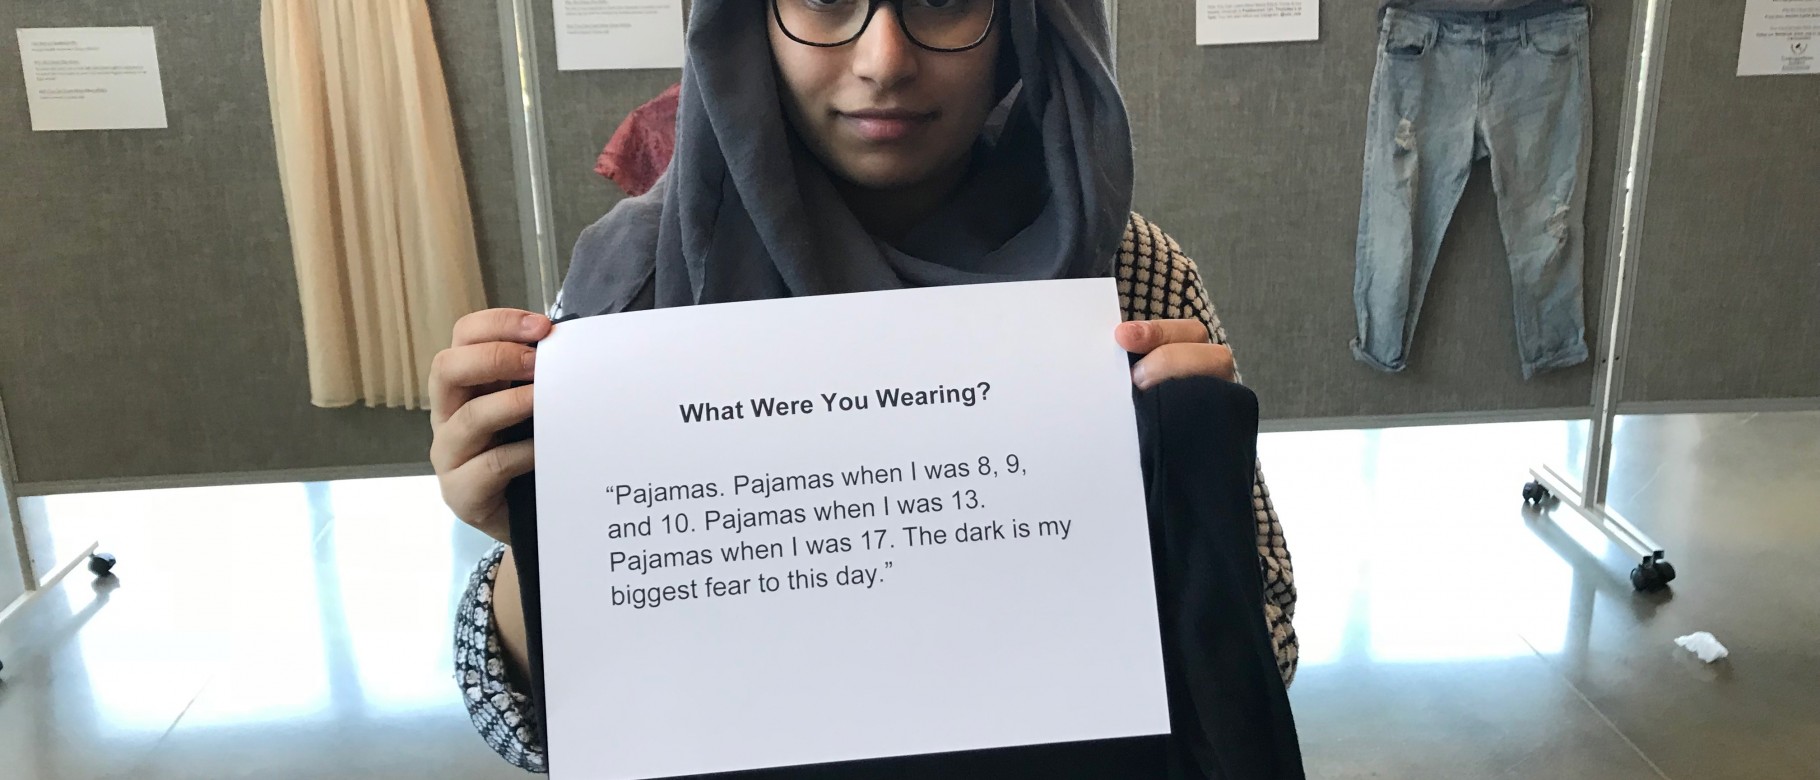 UNE student Hajra Chand helped organizers set up the 'What were you wearing' exhibit